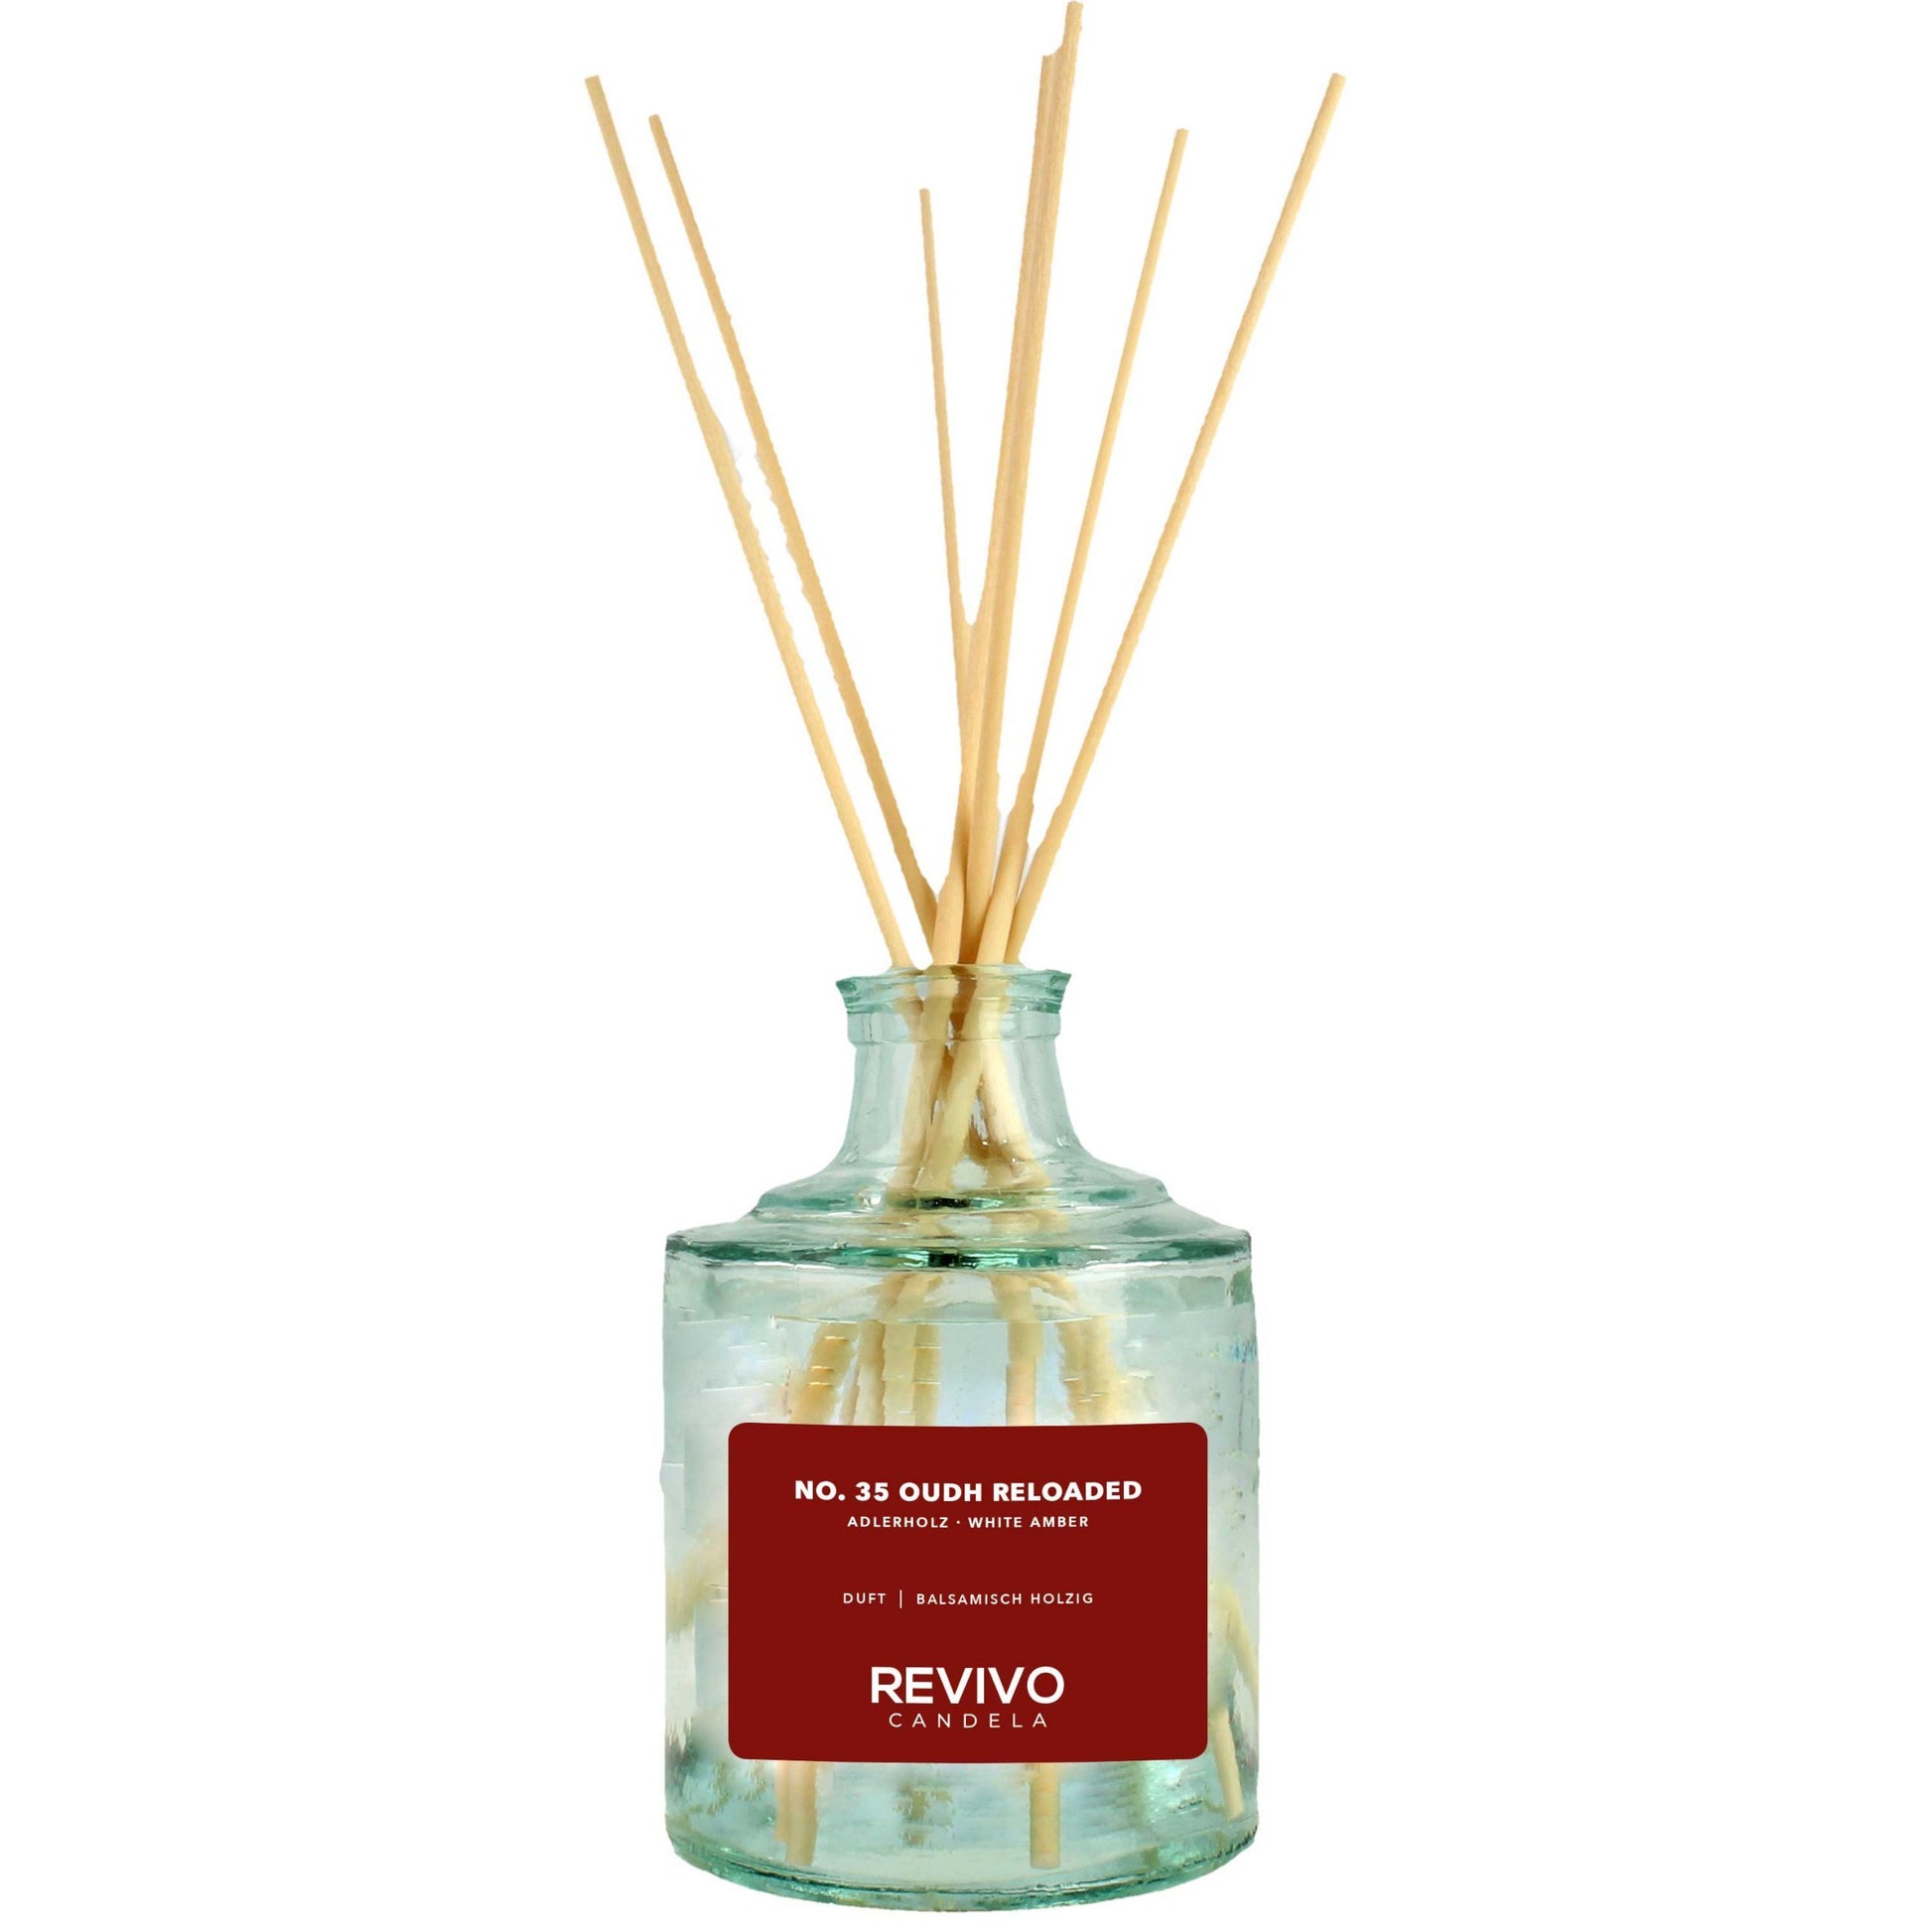 Revivo Candela Reed Diffuser No 35 Oudh Reloaded